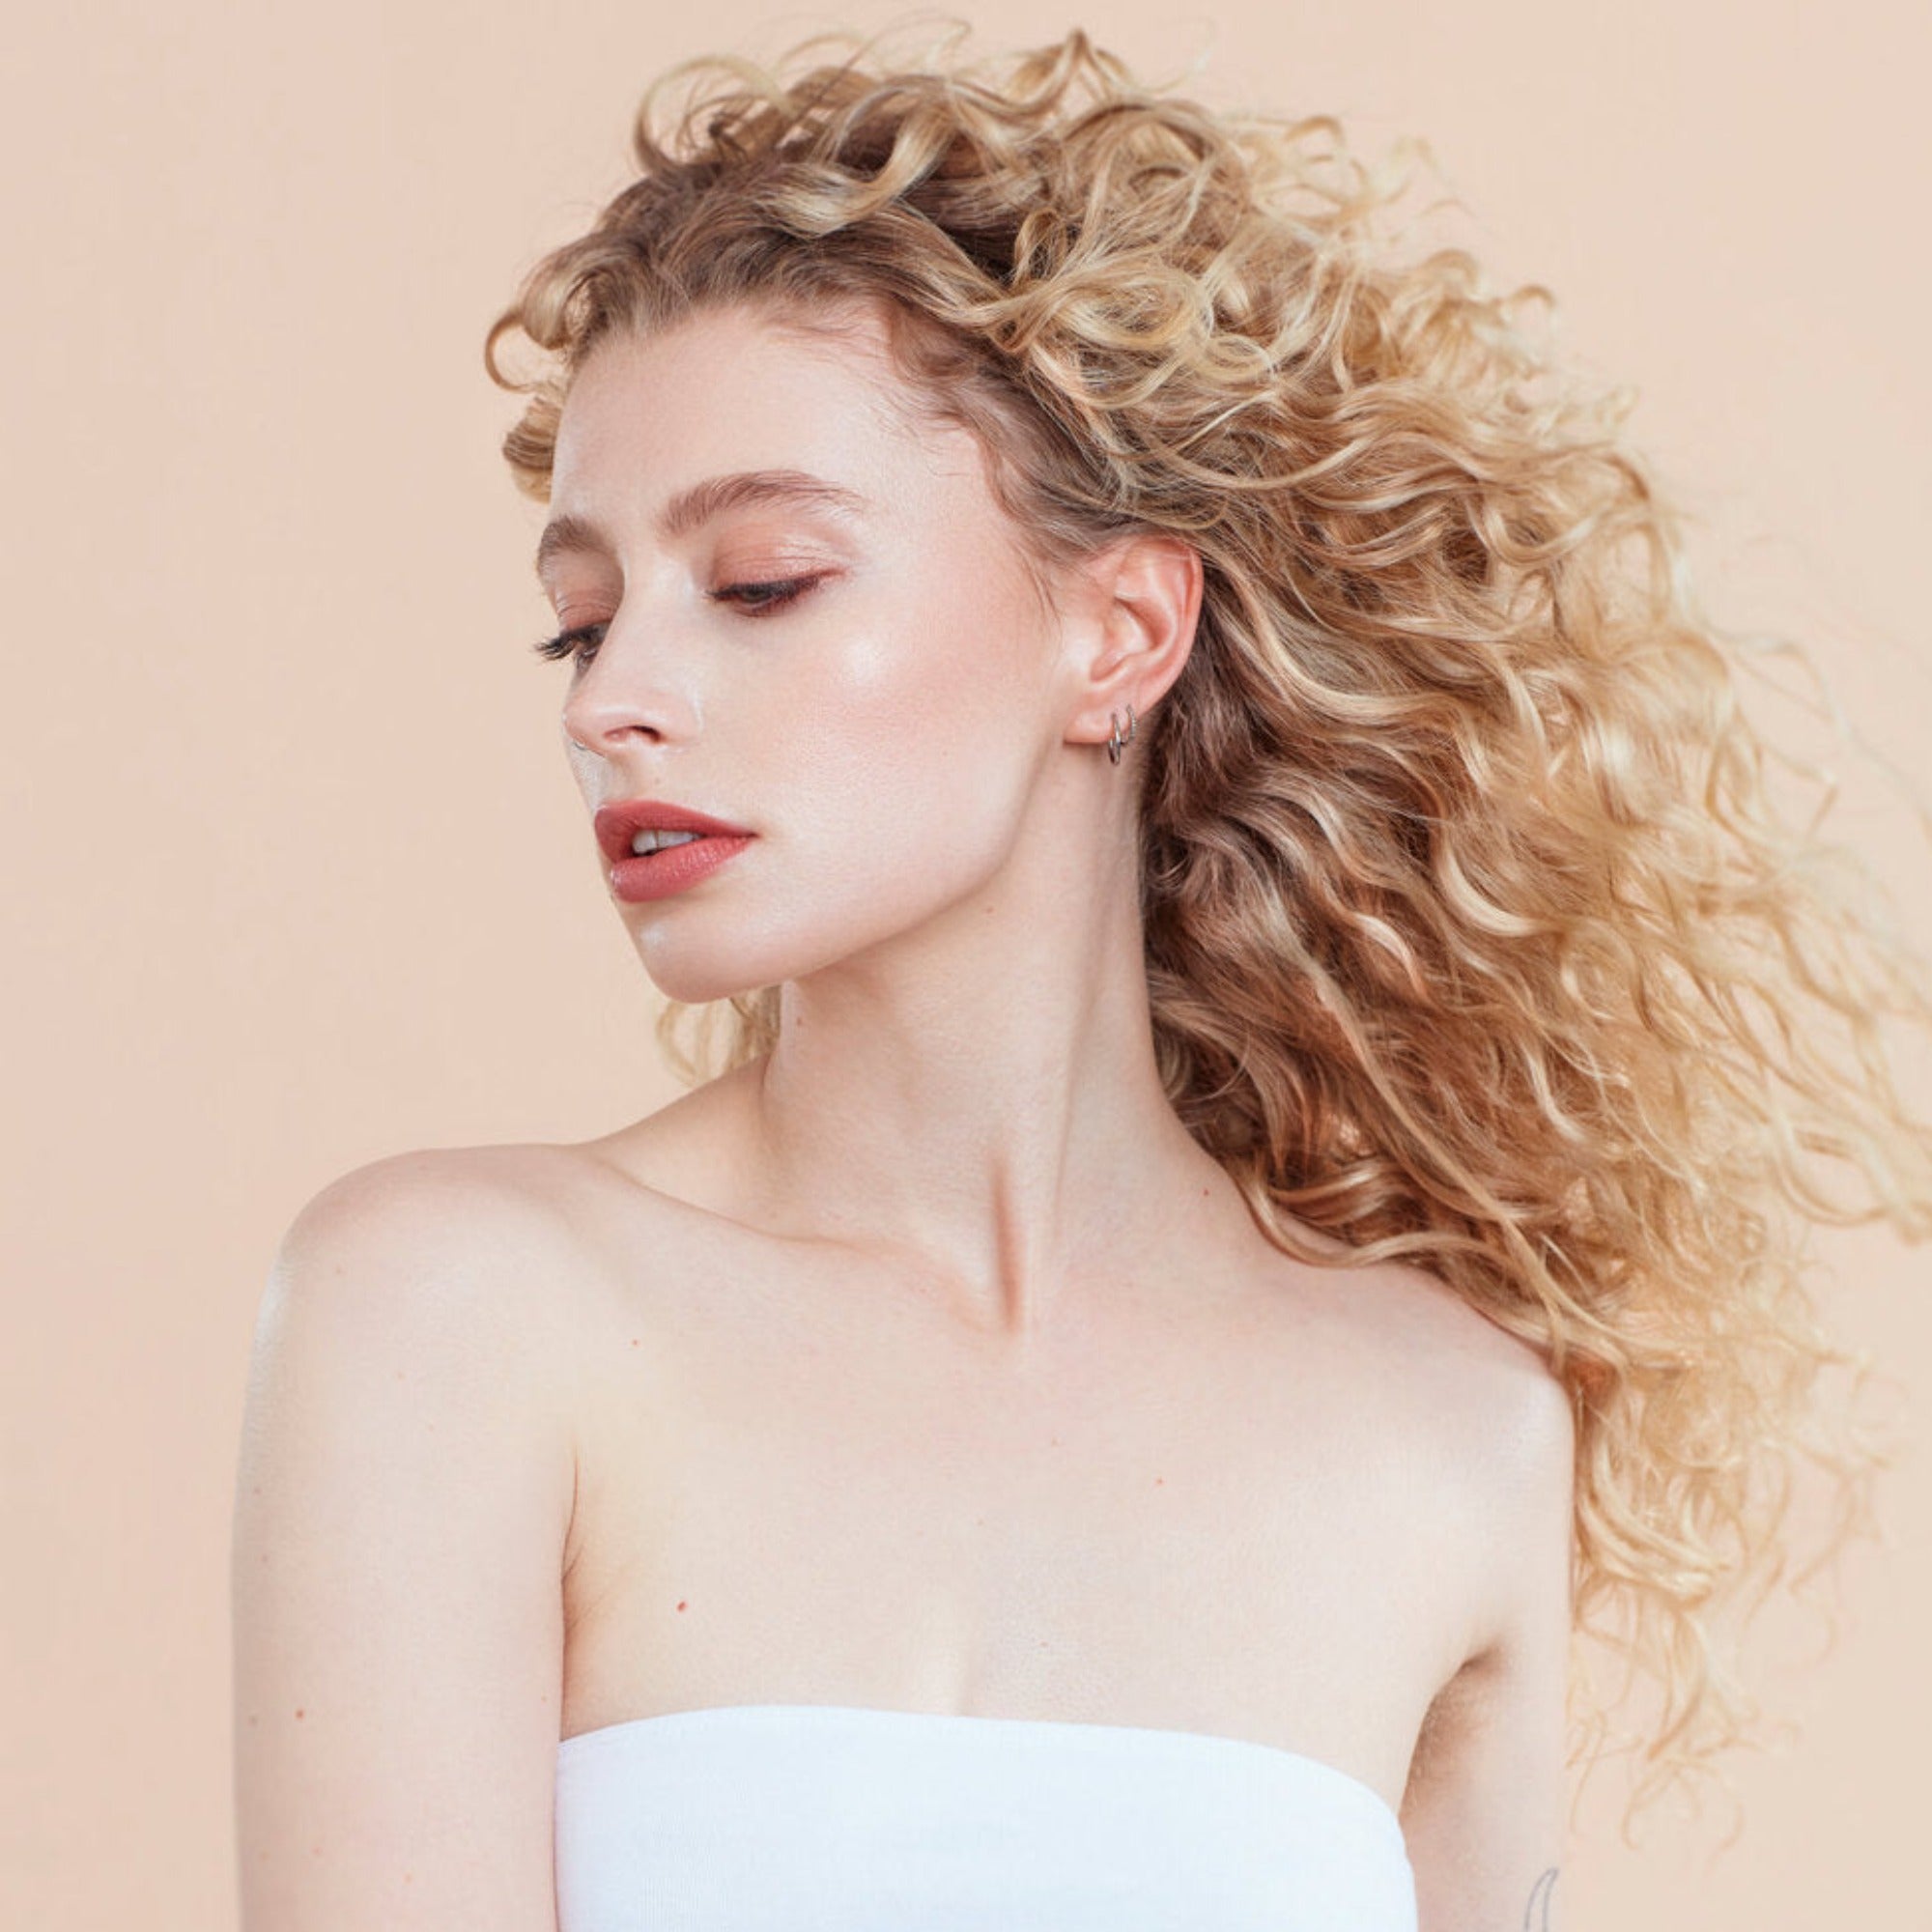 Female model with blond curly hair with moo and yoo conditioner followed by curl cream in her hair.  She is looking to her right and her hair is flowing. She is wearing a white bandeau. 